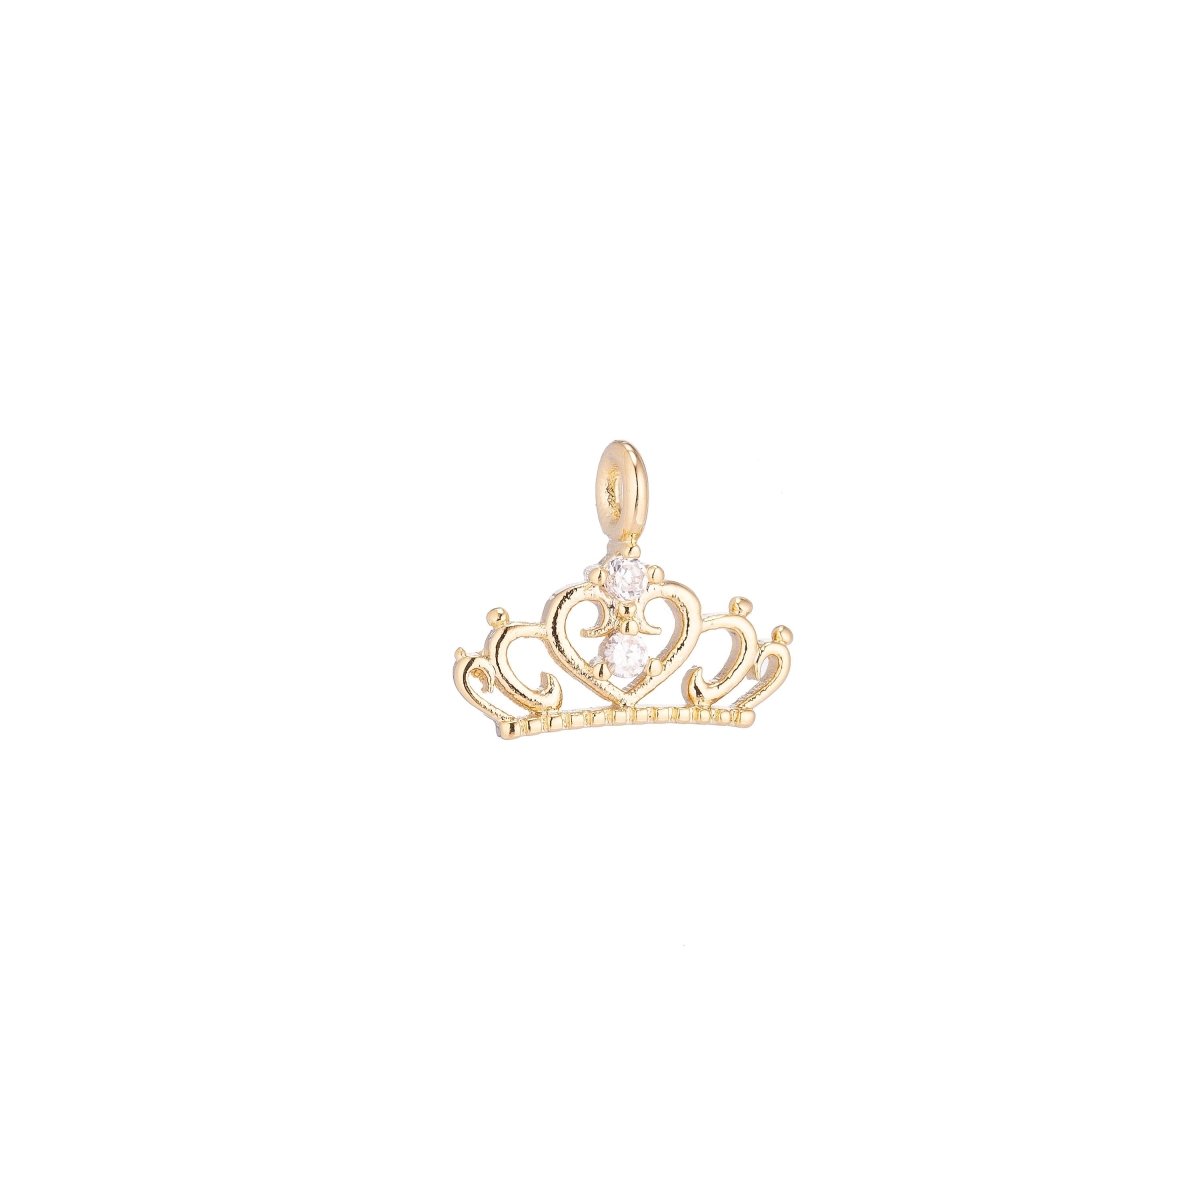 Dainty 18K Gold Filled Crown Tiara Queen Cubic Zirconia Necklace Pendant Bracelet Earring Charm for Jewelry MakingC-153 - DLUXCA